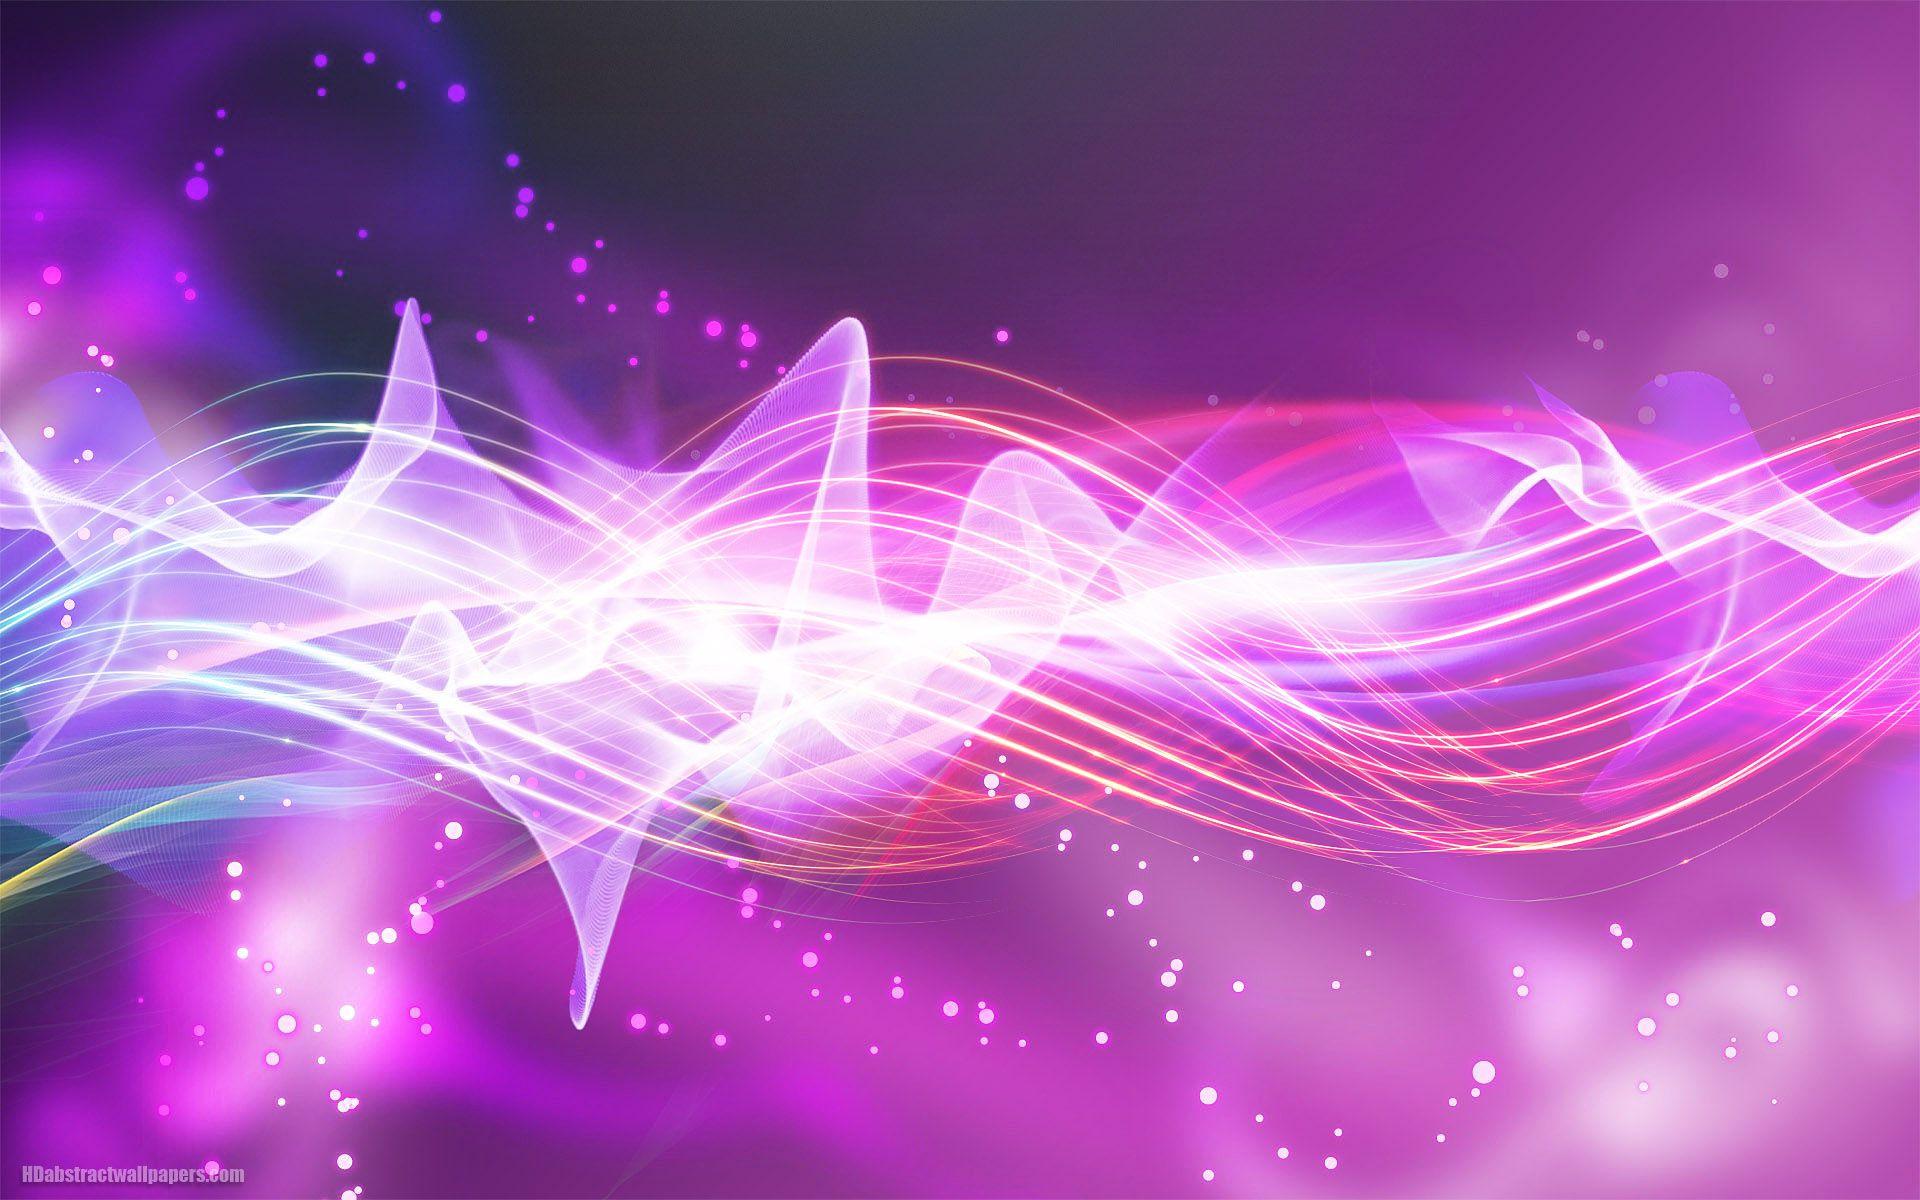 COOL PURPLE AND PINK ABSTRACT BACKGROUNDS  Wallpaper Cave